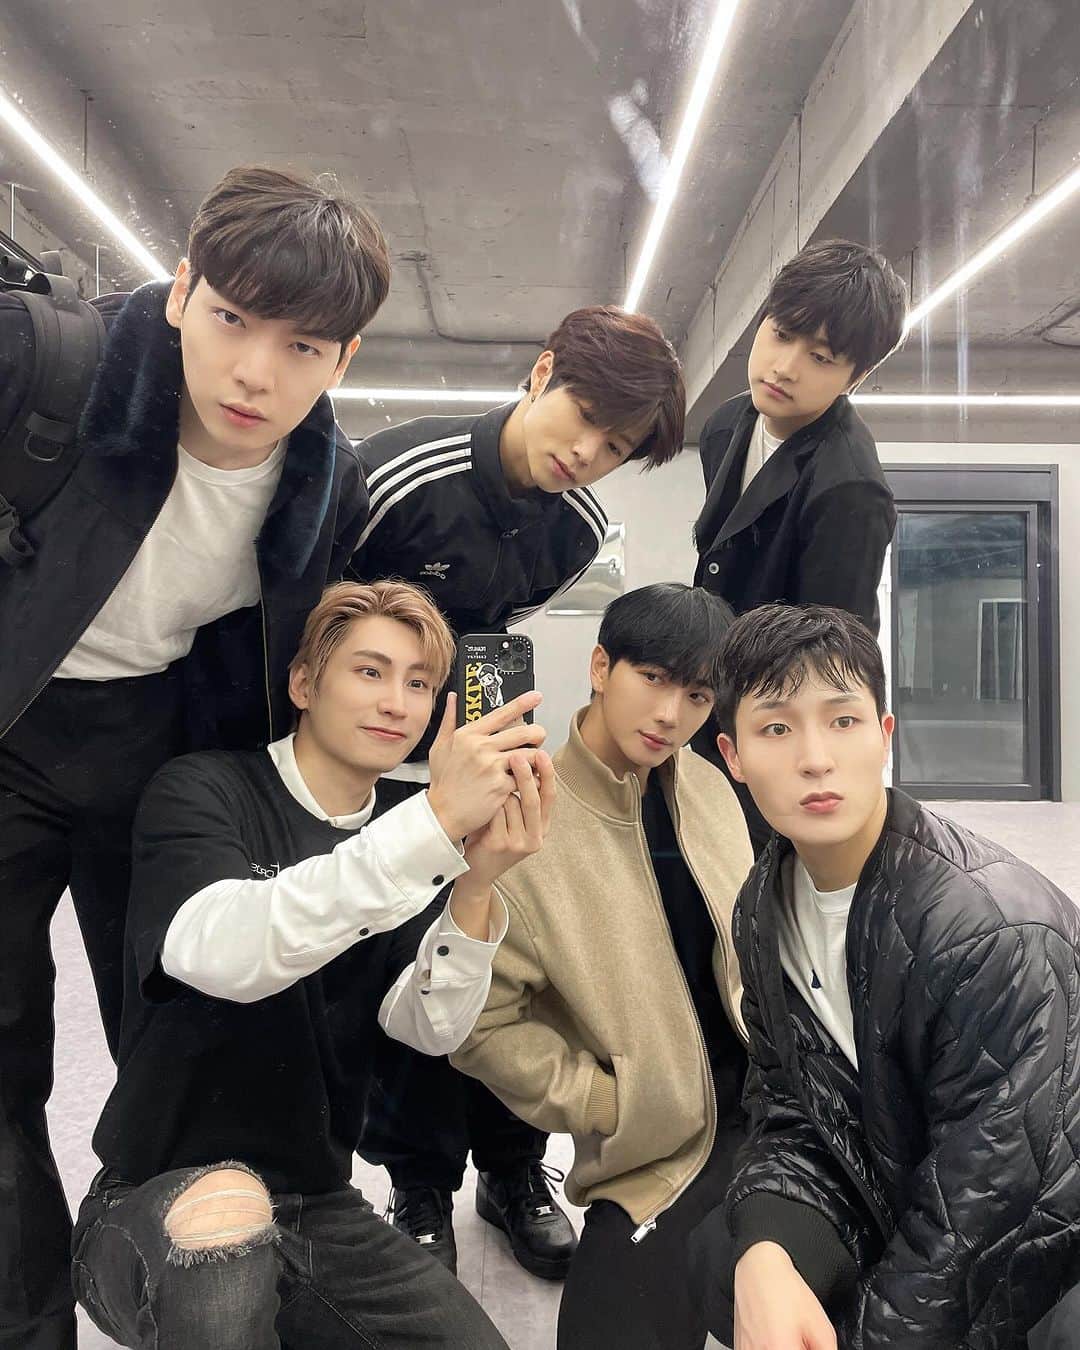 IN2ITさんのインスタグラム写真 - (IN2ITInstagram)「#IN2IT #SKYE Happy 6th Debut Anniversary #1026 🐵🐵🐔🐶🐶🐷   I hate these guys but love them at the same time HAHAHA because every time when I’m with them I feel like I am a 3 years old kid 👦🏻 because they always take care of me buy me food makes me laugh makes me cry makes me angry makes me miss them 👁️💙👁️ honestly im glad to meet all of them because they tought me a lot in Korea   And I miss all of those memories we made in Korea we woke up together ; brush teeth together ; bath together (sometimes because we in a hurry HAHAH) ; work together ; laugh together ; cry together ; going to all of those countries first time together ; cook together ; play games together ; meet IN2U together ; fight together (sometimes Jiahn and Inpyo like kids they fight in the house like gusti use fake sword that UU gave and fight)   Conclusion : you guys are always my best buddy no matter what happened love you all so much @jiahnx_foolsday @yeontae_j @from.eno @hyuuunuk @lee1npyo @official_in2it   TMI of the members  #Jiahn : sometimes really like kid seriously I don’t lie hahahahahaga but still he always accompany me to shopping without saying no  #Yeontae : he is like a person who don’t show his kindness to people but actually he is and I always live in his house when I visited to korea and he always spent me makchang HAHAHA  #Inho : he was my roommate every time when we travel to other countries and I think only both of us eat a lot cause we always bought a lot and share together  #Hyunuk : he is really my best buddy because when I was down he always cheered me up and I said I don’t have much line in a song he even asked the director to give me his line  #Inpyo : even tho he is maknae but sometimes I felt he’s so cool maybe because he is our leader and he lead us well and because he’s the tallest I like lean on his shoulder hahaha   Ok too long kthxbye looks forward to our future and can’t wait to share more good news to UU 💙💙  #IN2IT #SKYE #1026 #isaacVkm #邬凯名 #아이젝 #젝그 #인투잇 #스카이 #지안 #연태 #인호 #현욱 #인표」10月26日 21時08分 - official_in2it